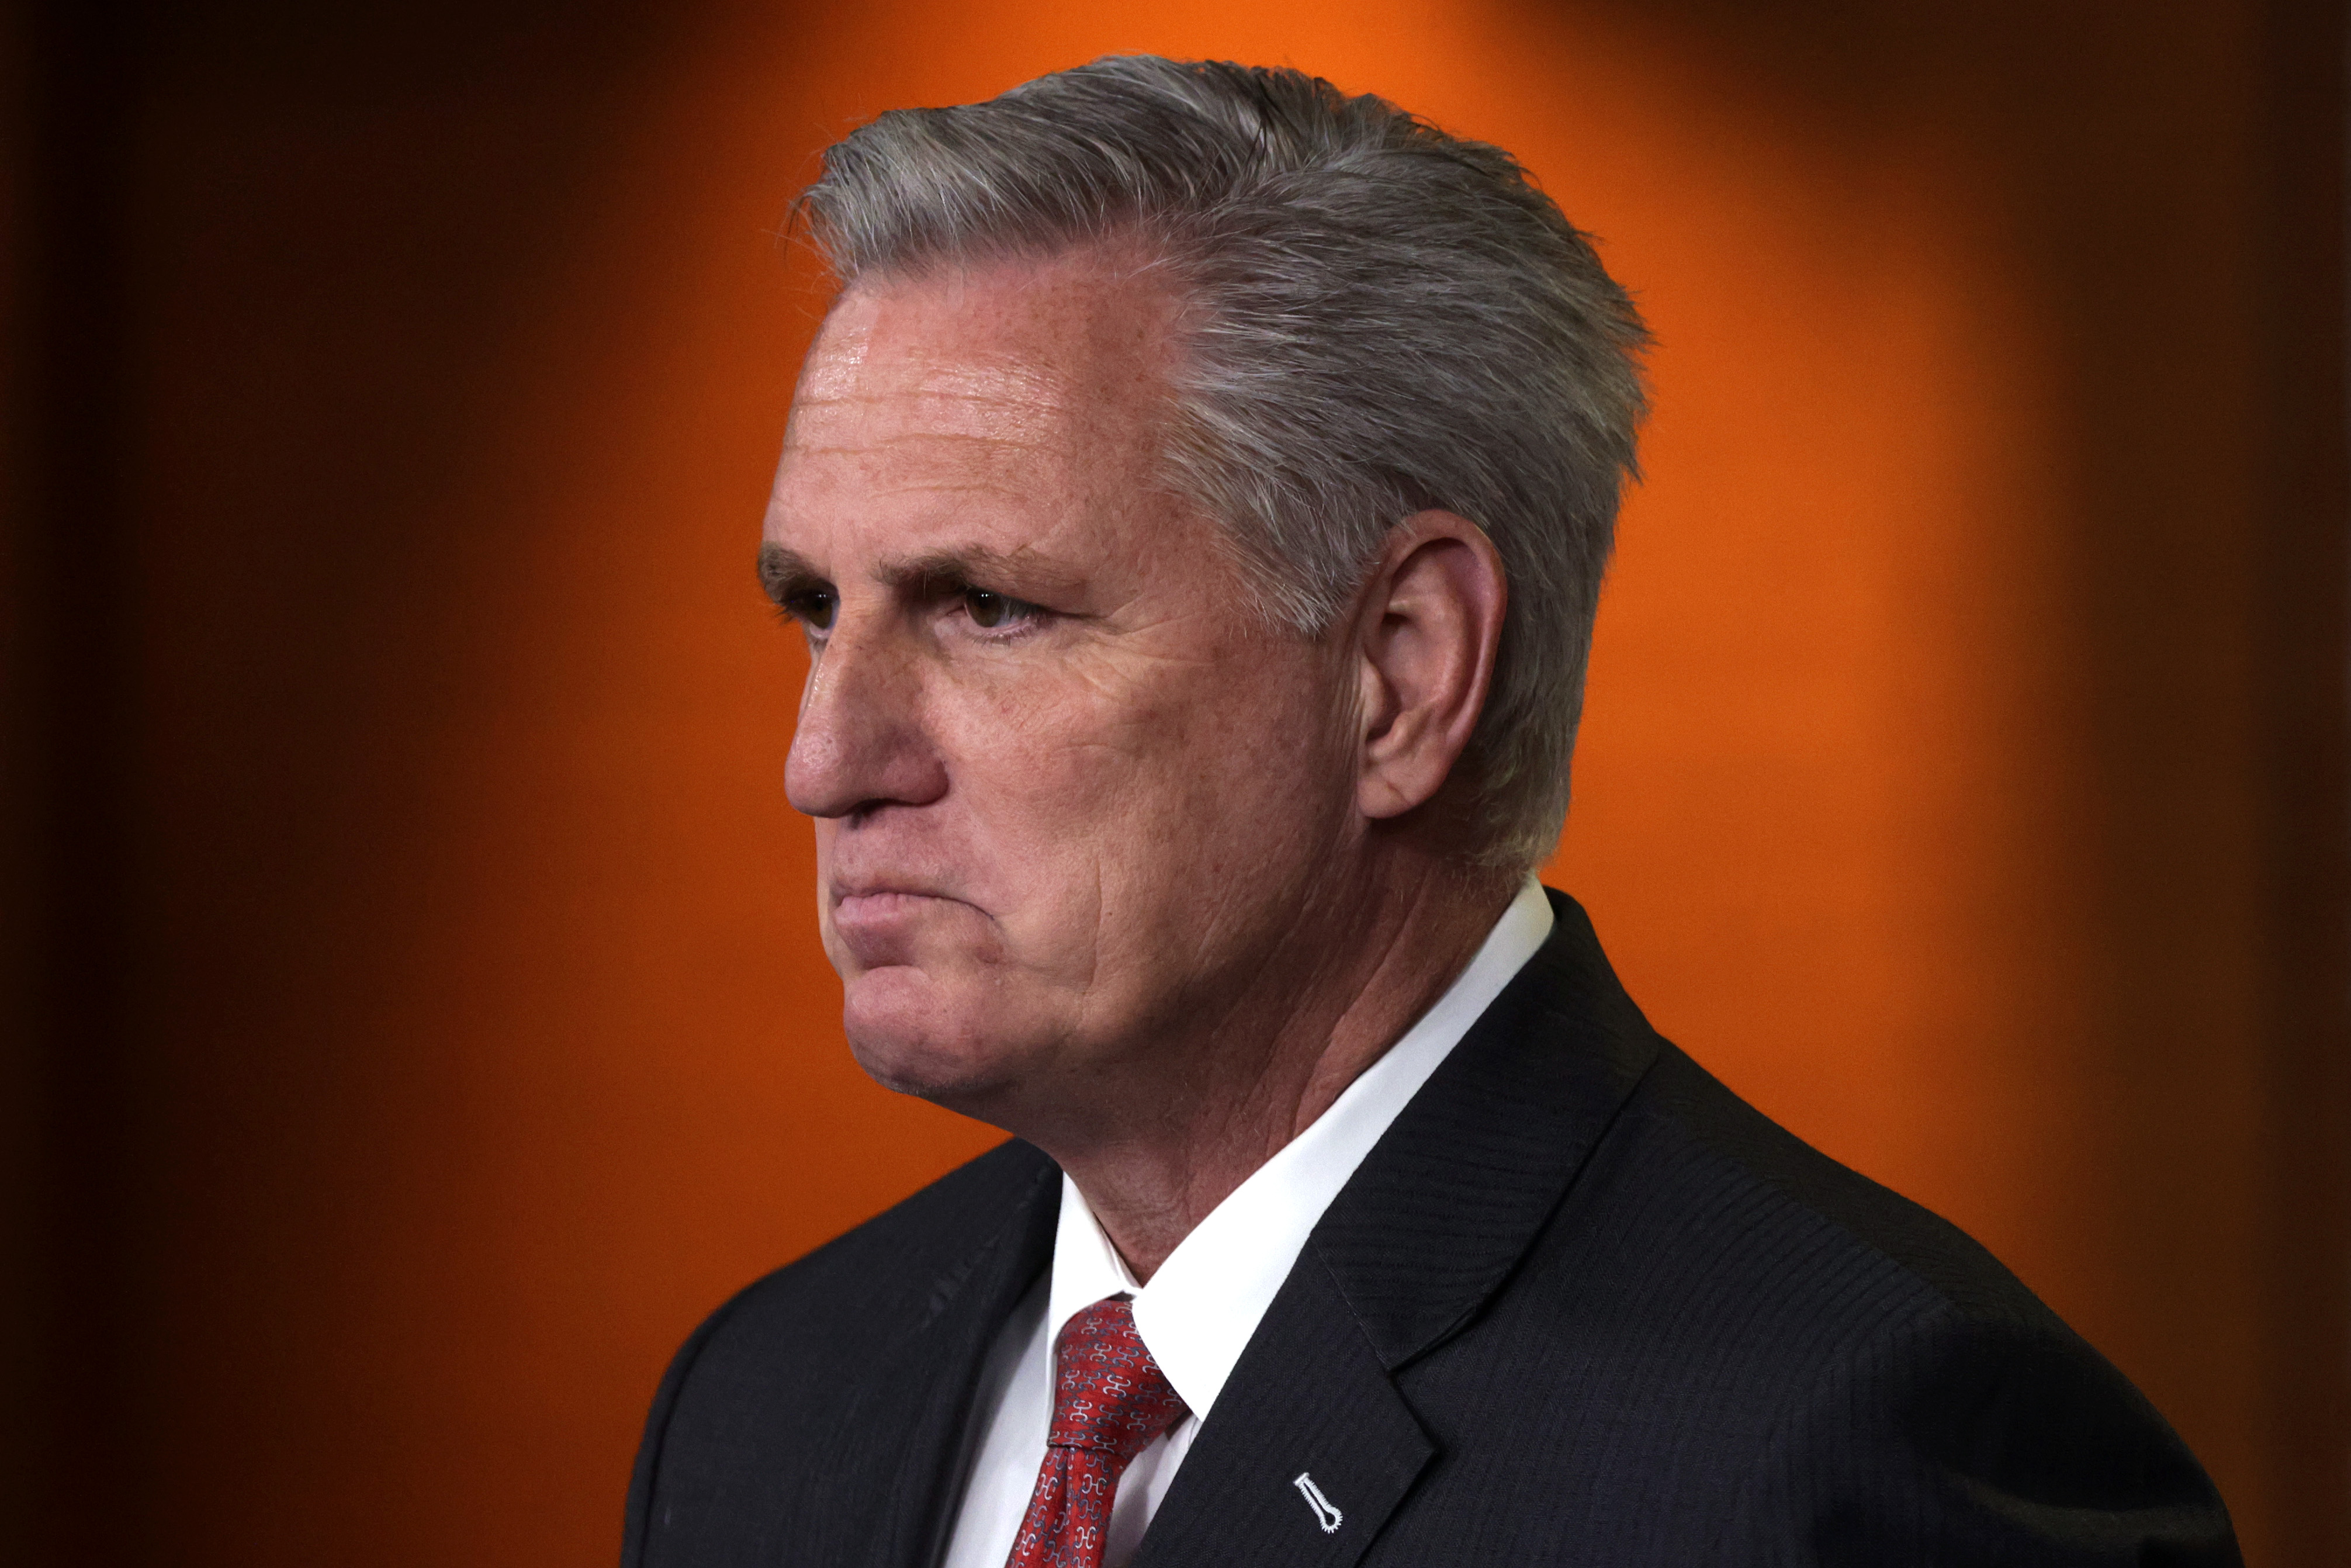 Rep. Kevin McCarthy (R-CA) is struggling to win the votes to become speaker of the House